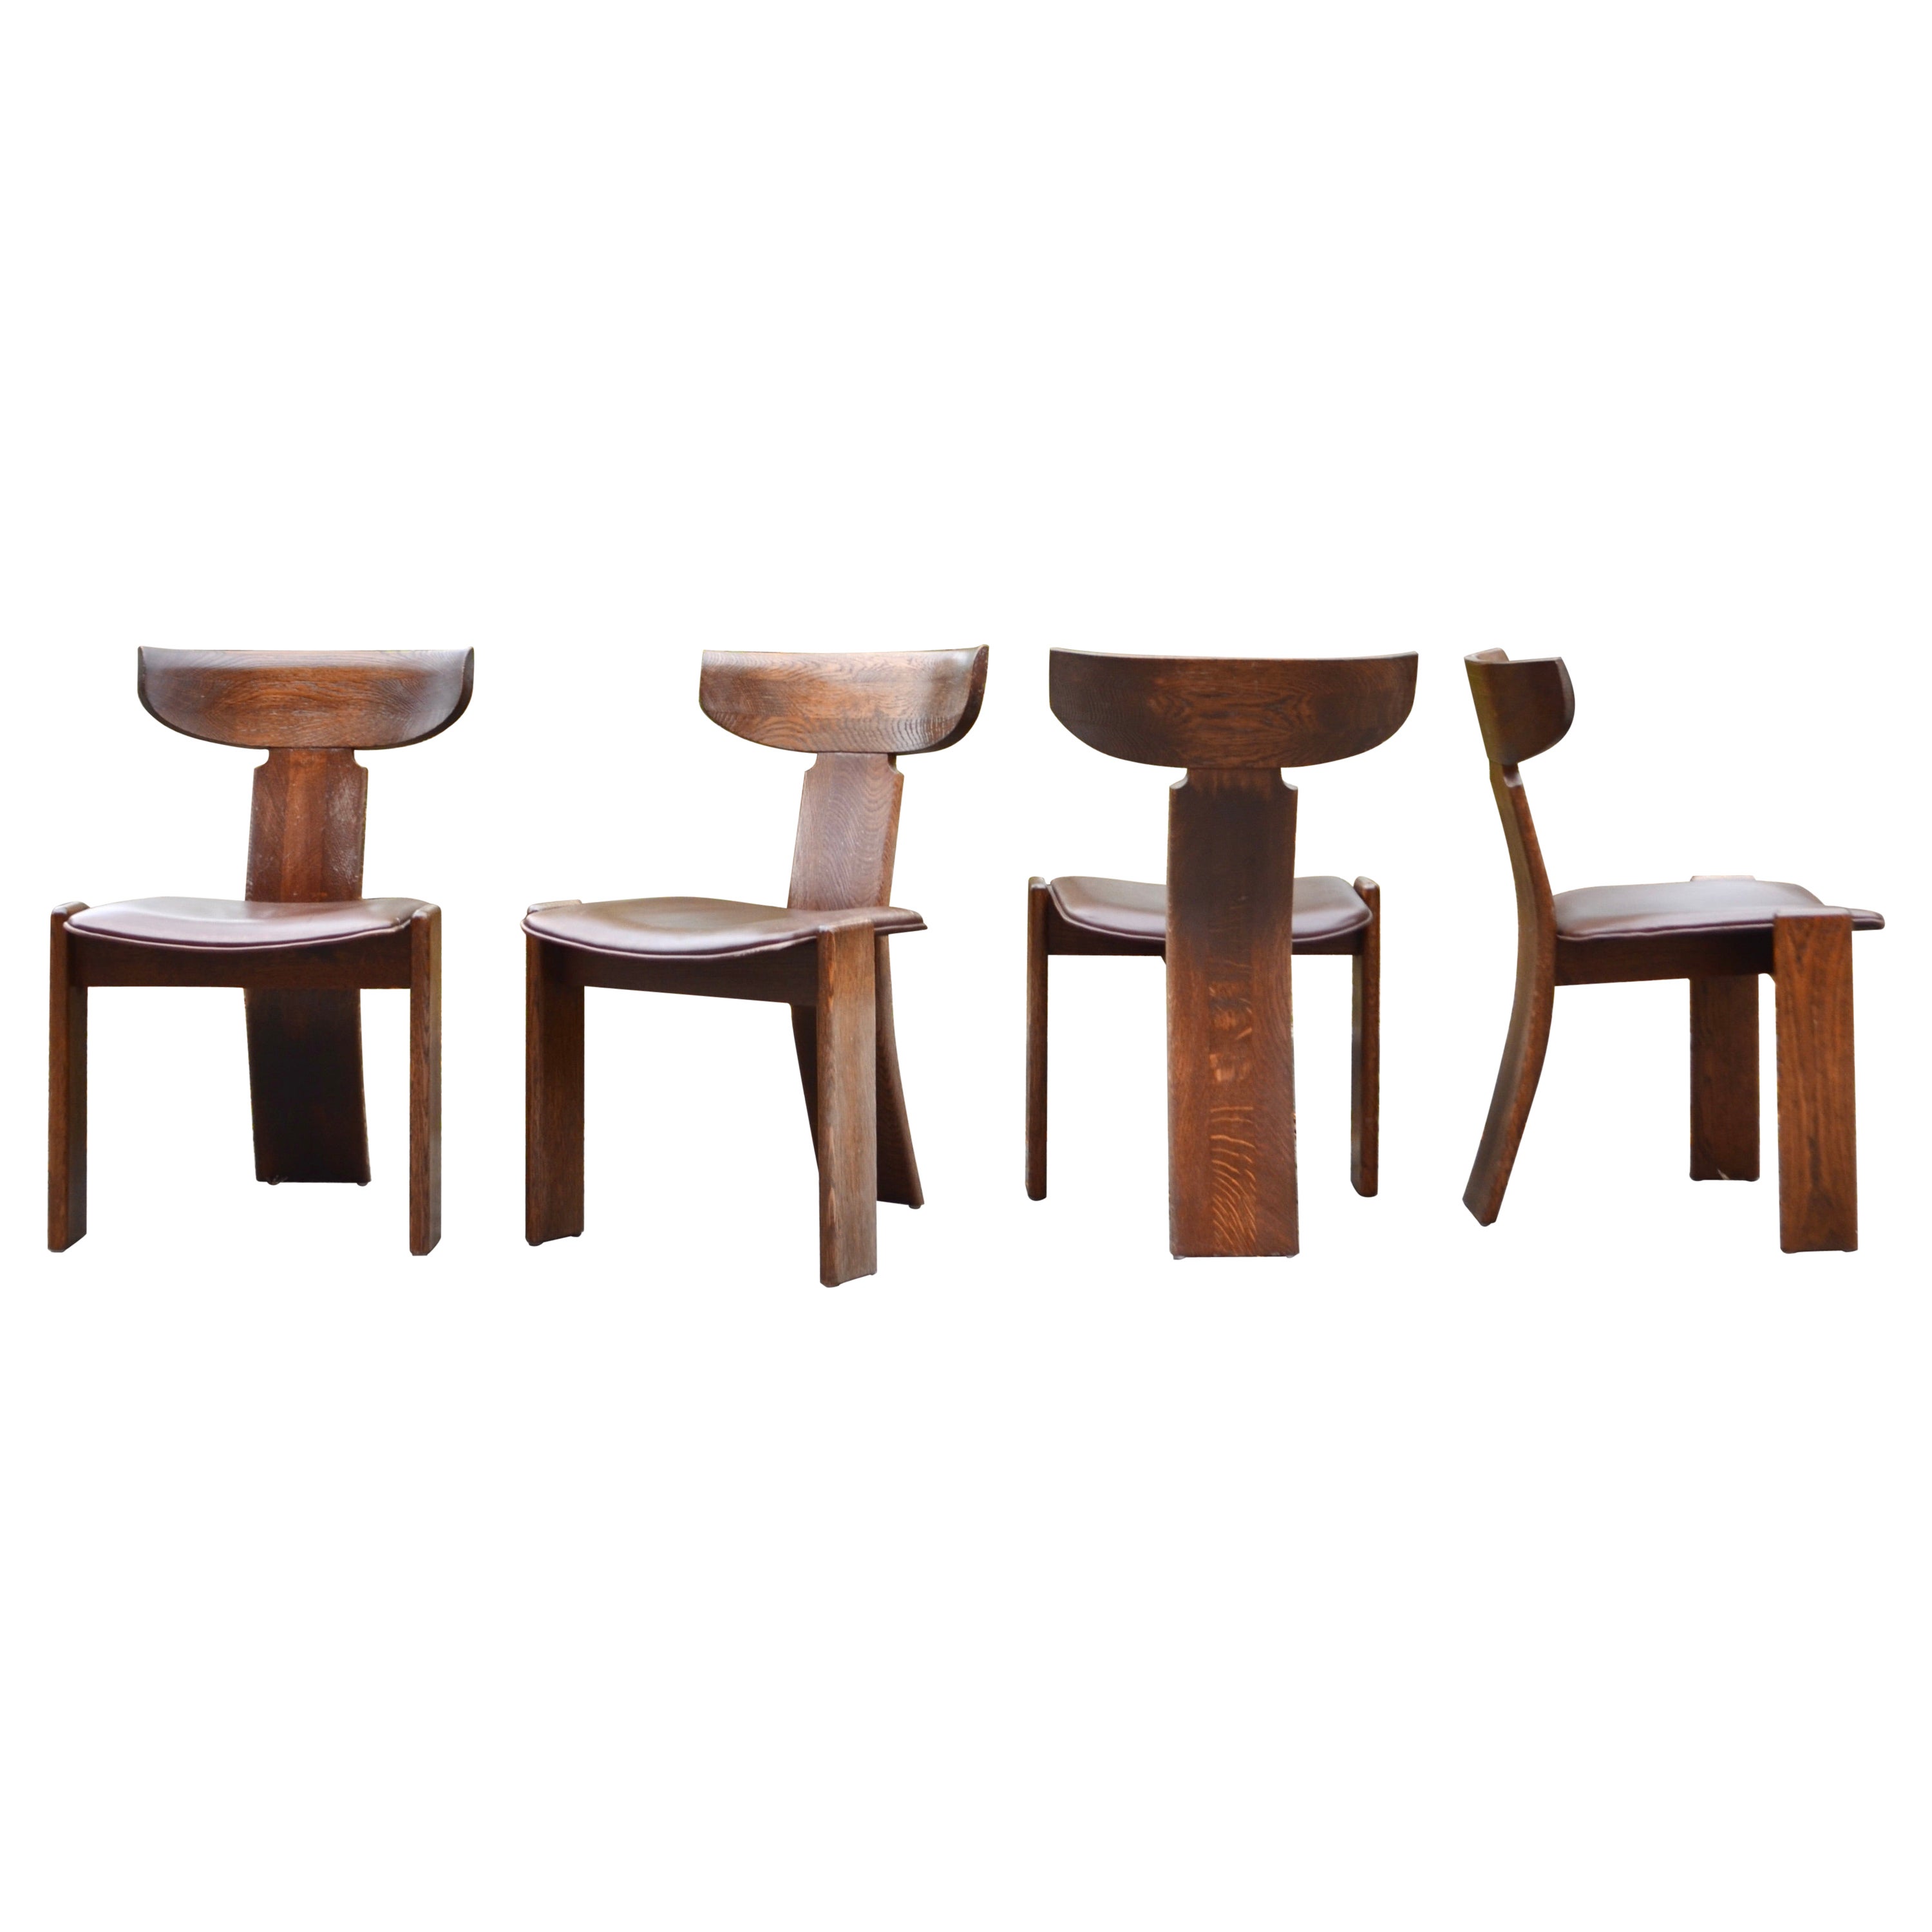 LSS Purist Brutalist Monk Dining Chair Set of 4 in the Manner of Tobia Scarpa